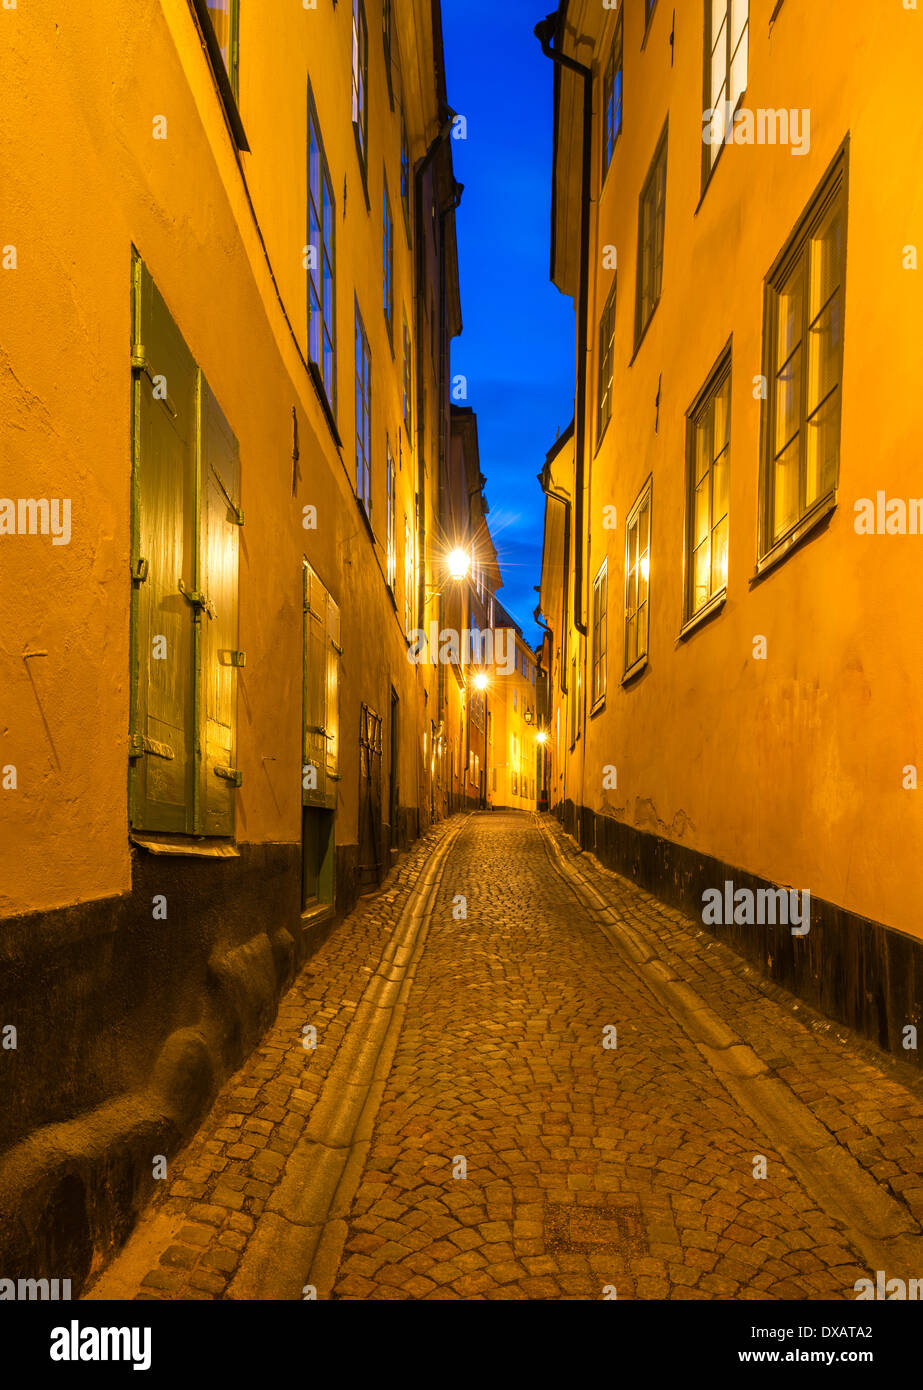 Baggensgatan, a narrow cobbled street in Gamla Stan, The old town, of Stockholm, Sweden. Stock Photo